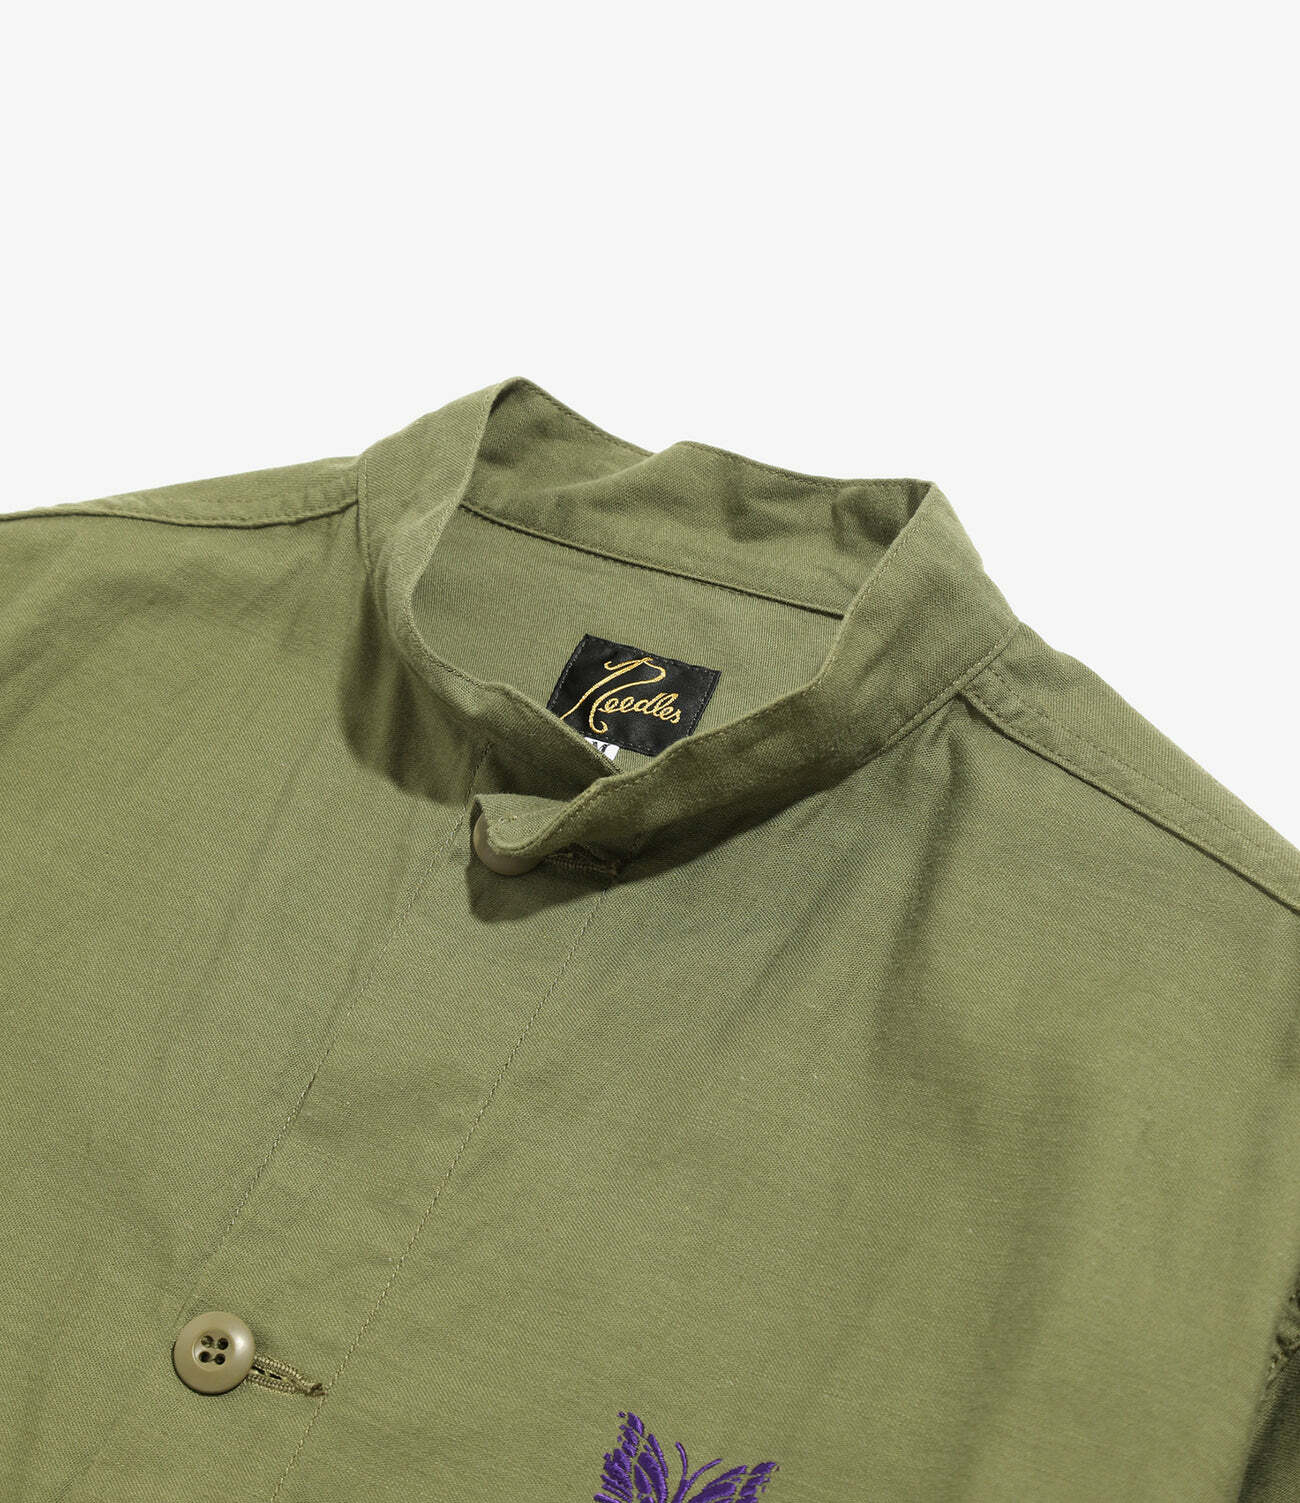 NEEDLES S.C. ARMY SHIRT - BACK SATEEN - OLIVE